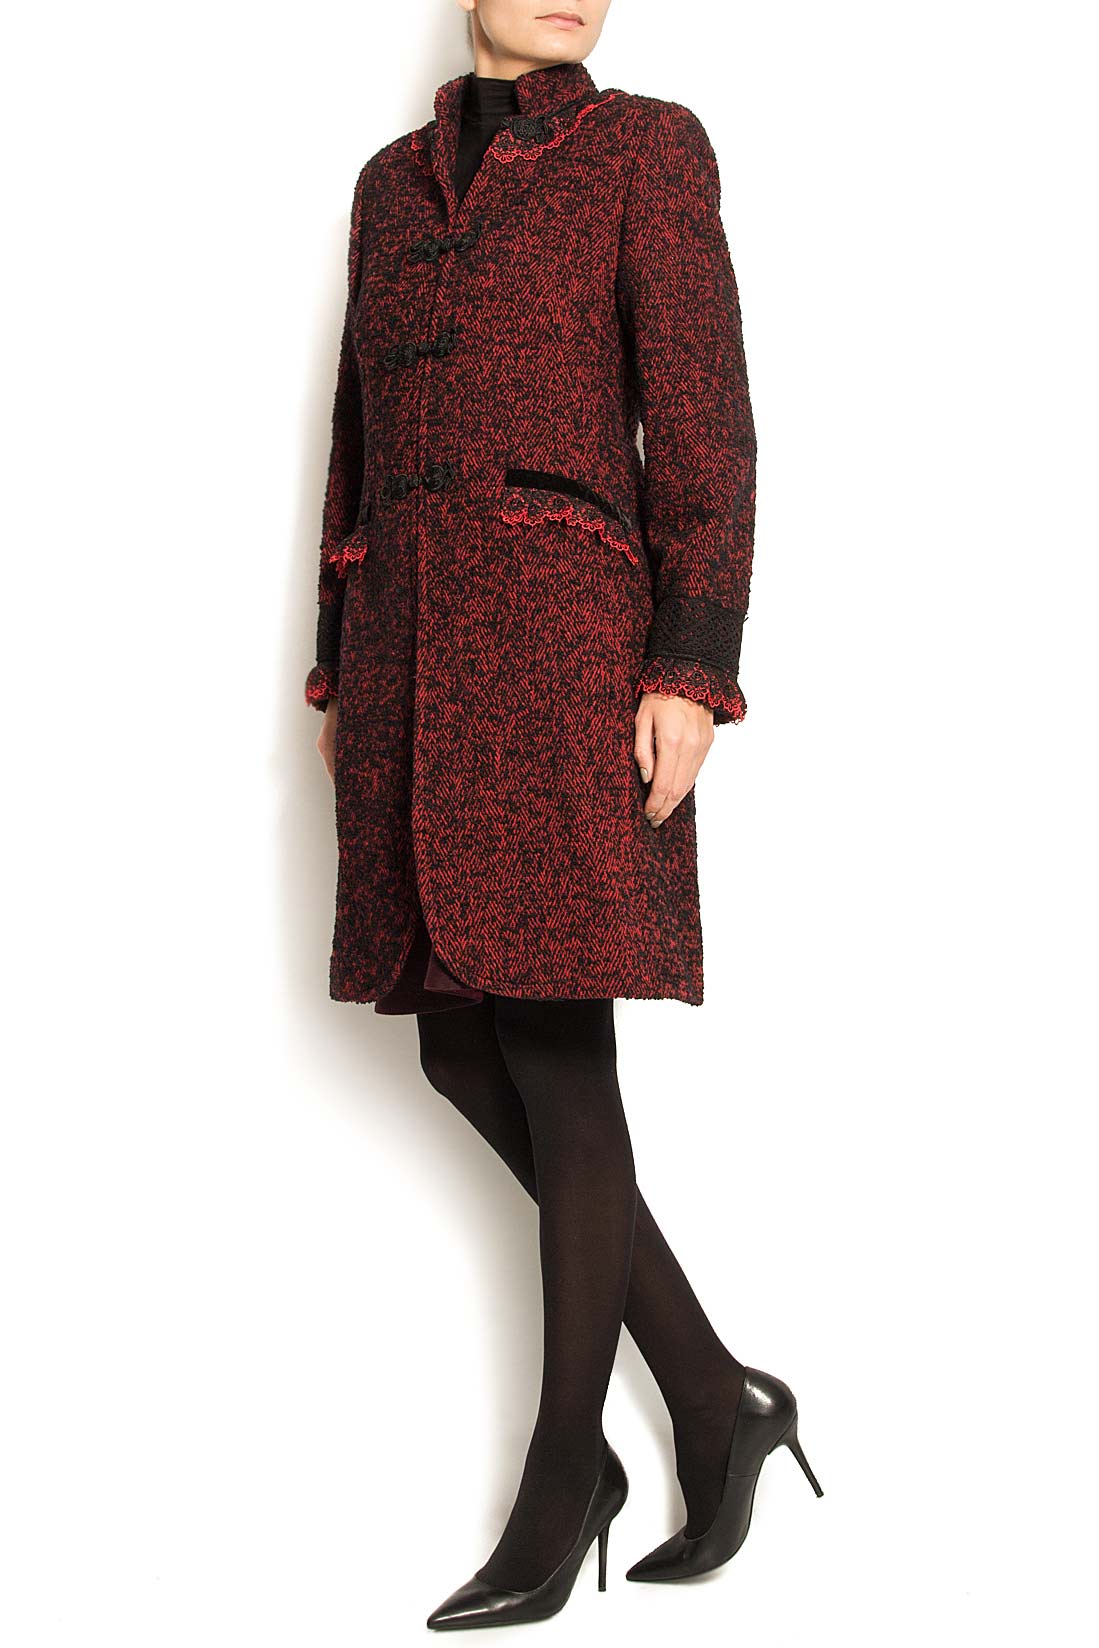 Wool coat with applications Carmen Ormenisan image 2